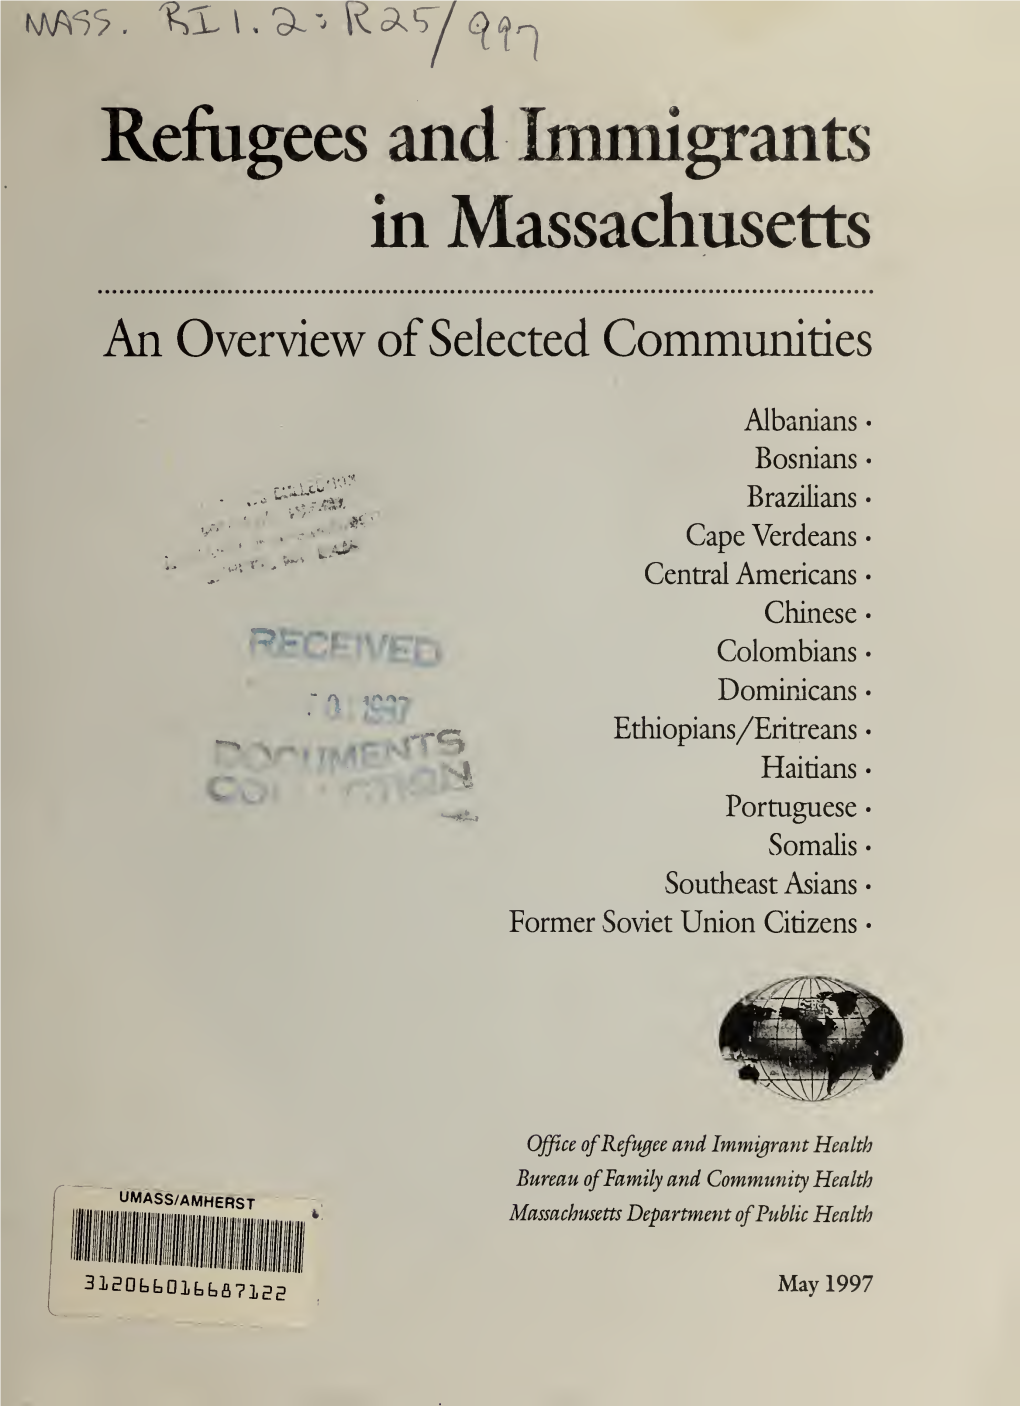 Refugees and Immigrants in Massachusetts